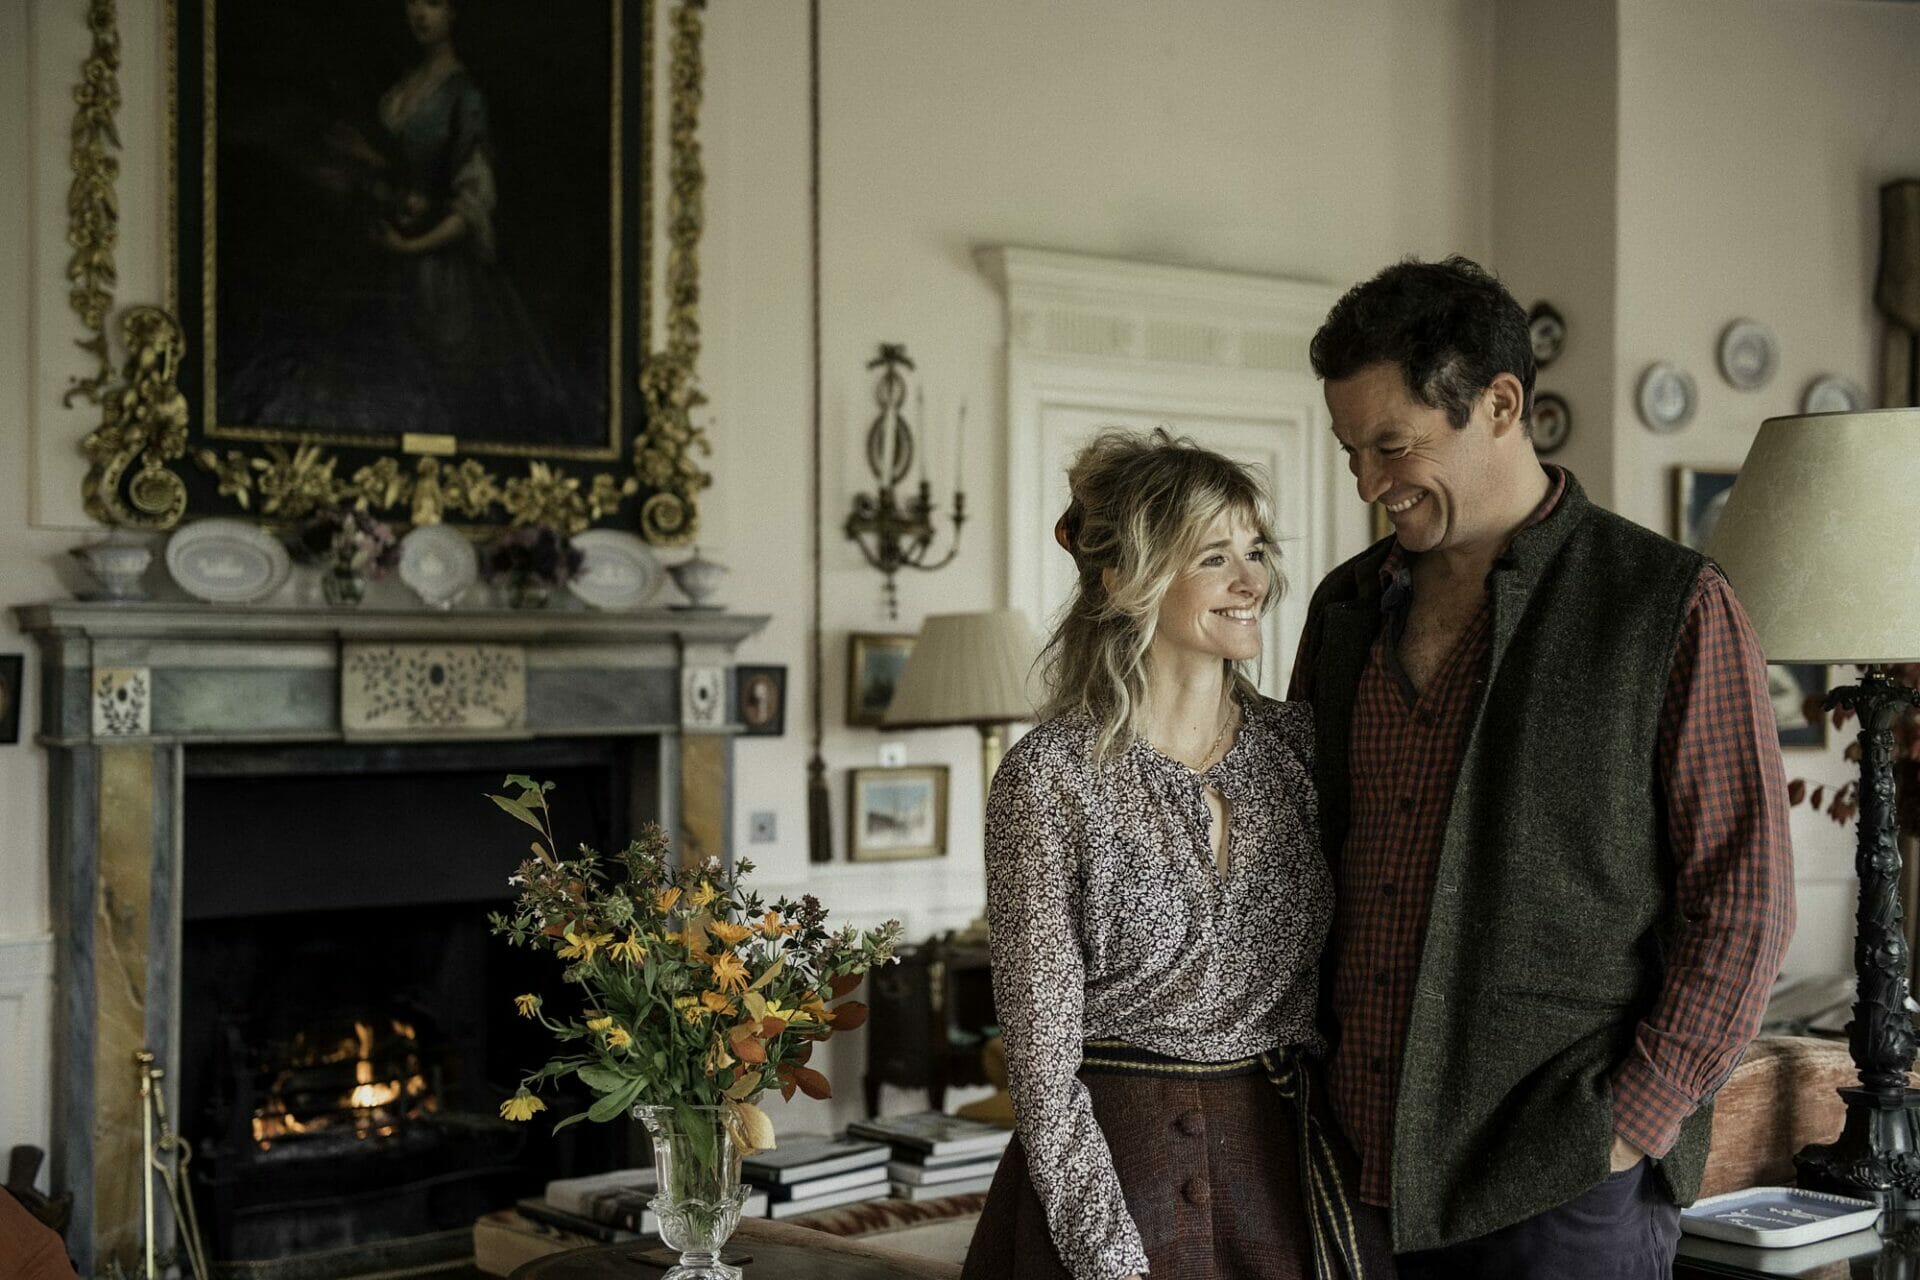 Architecturaldigest.com - Tour Dominic West and Catherine Fitzgerald's Historic Home